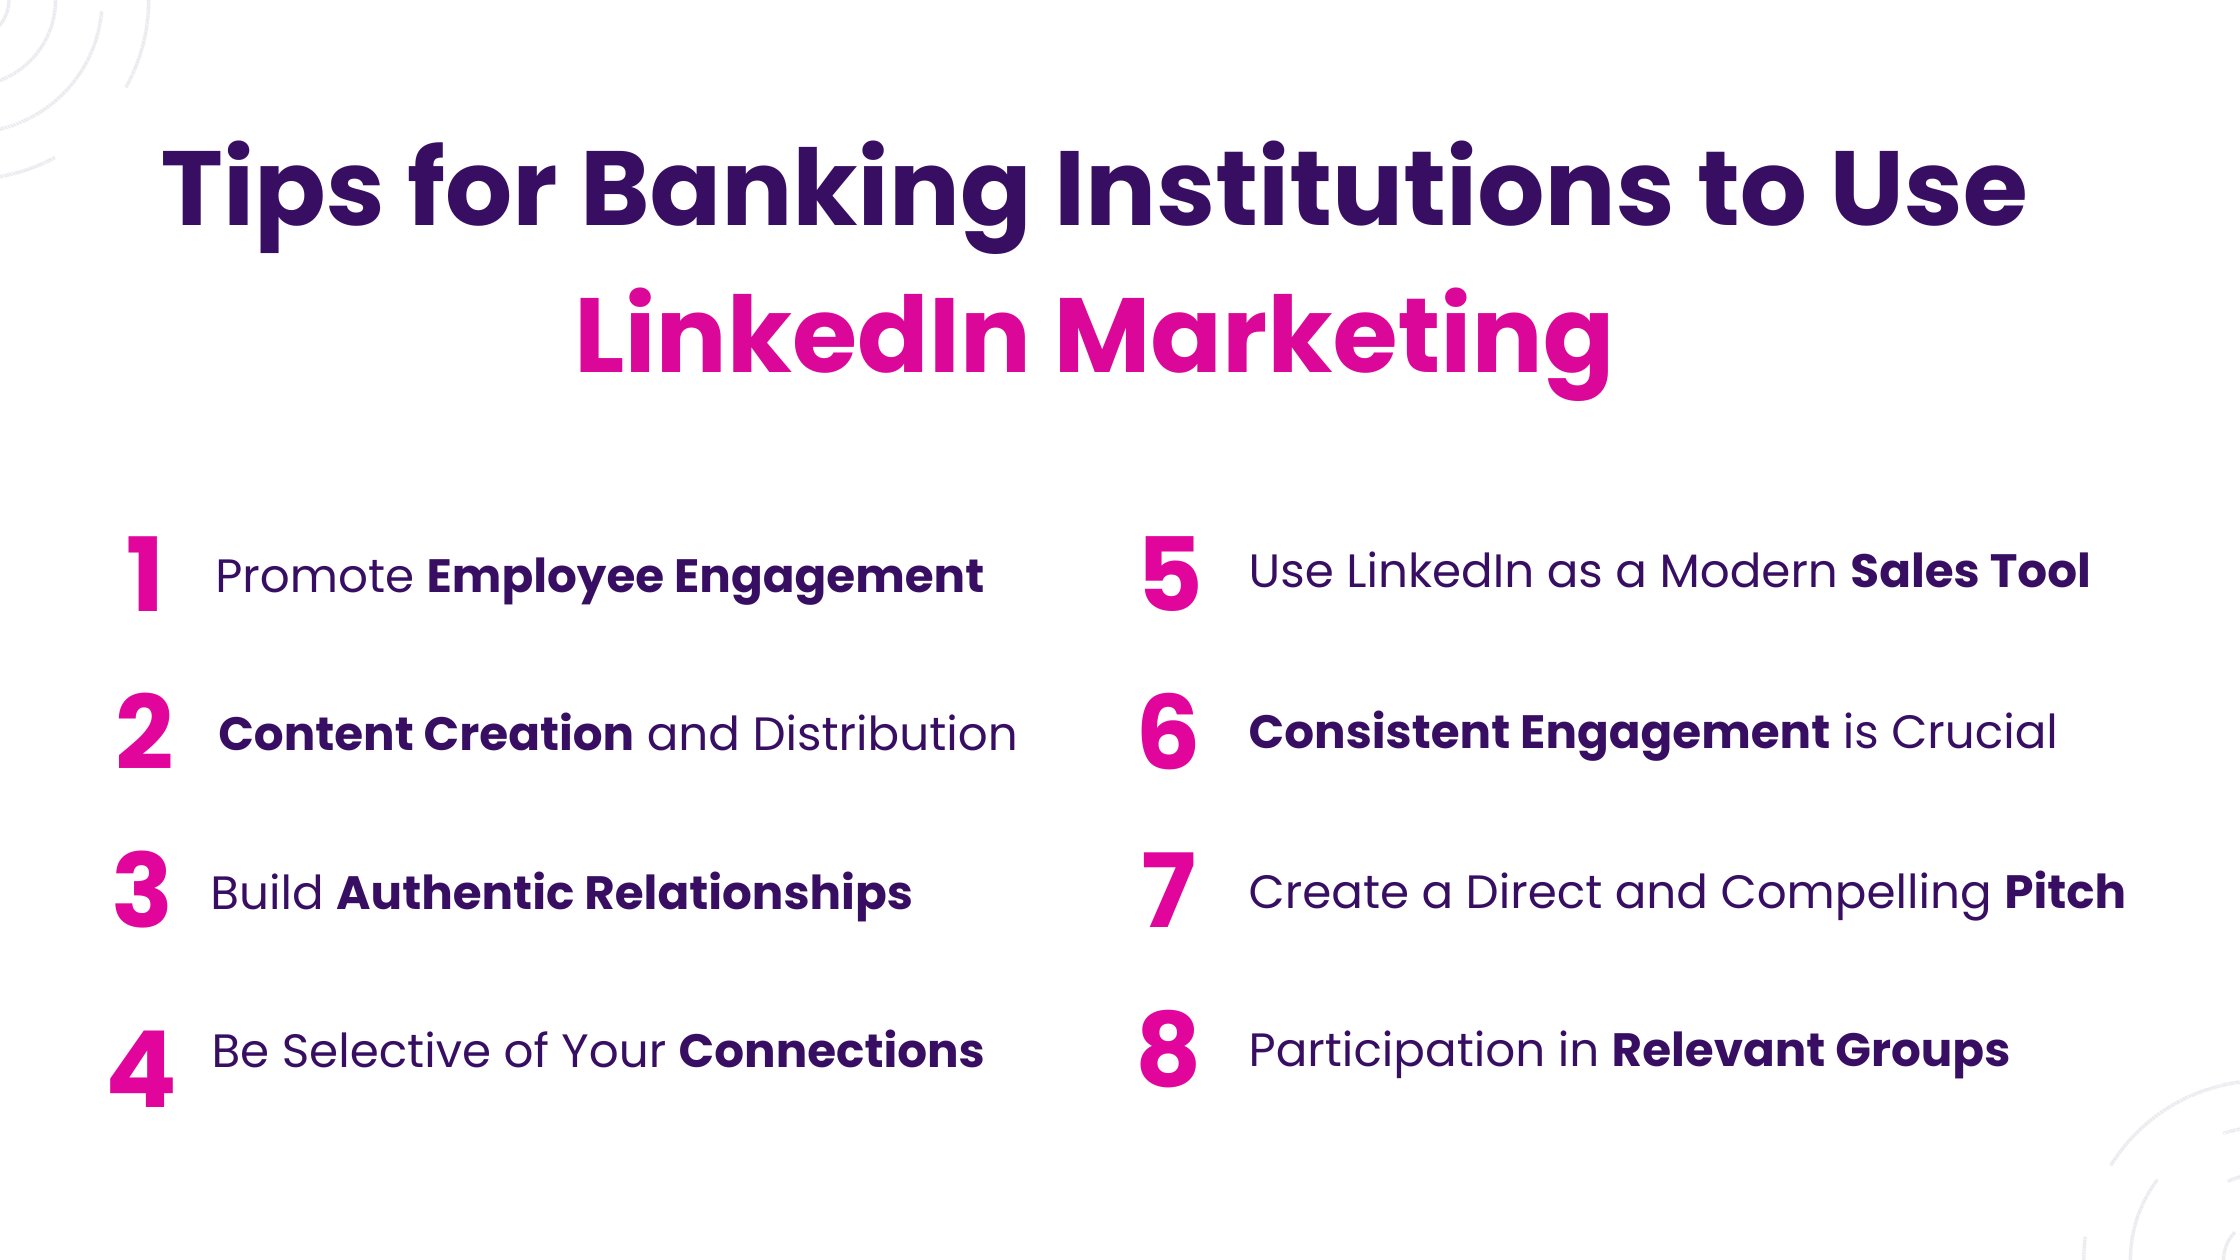 Tips for Banking Institutions to Use LinkedIn Marketing